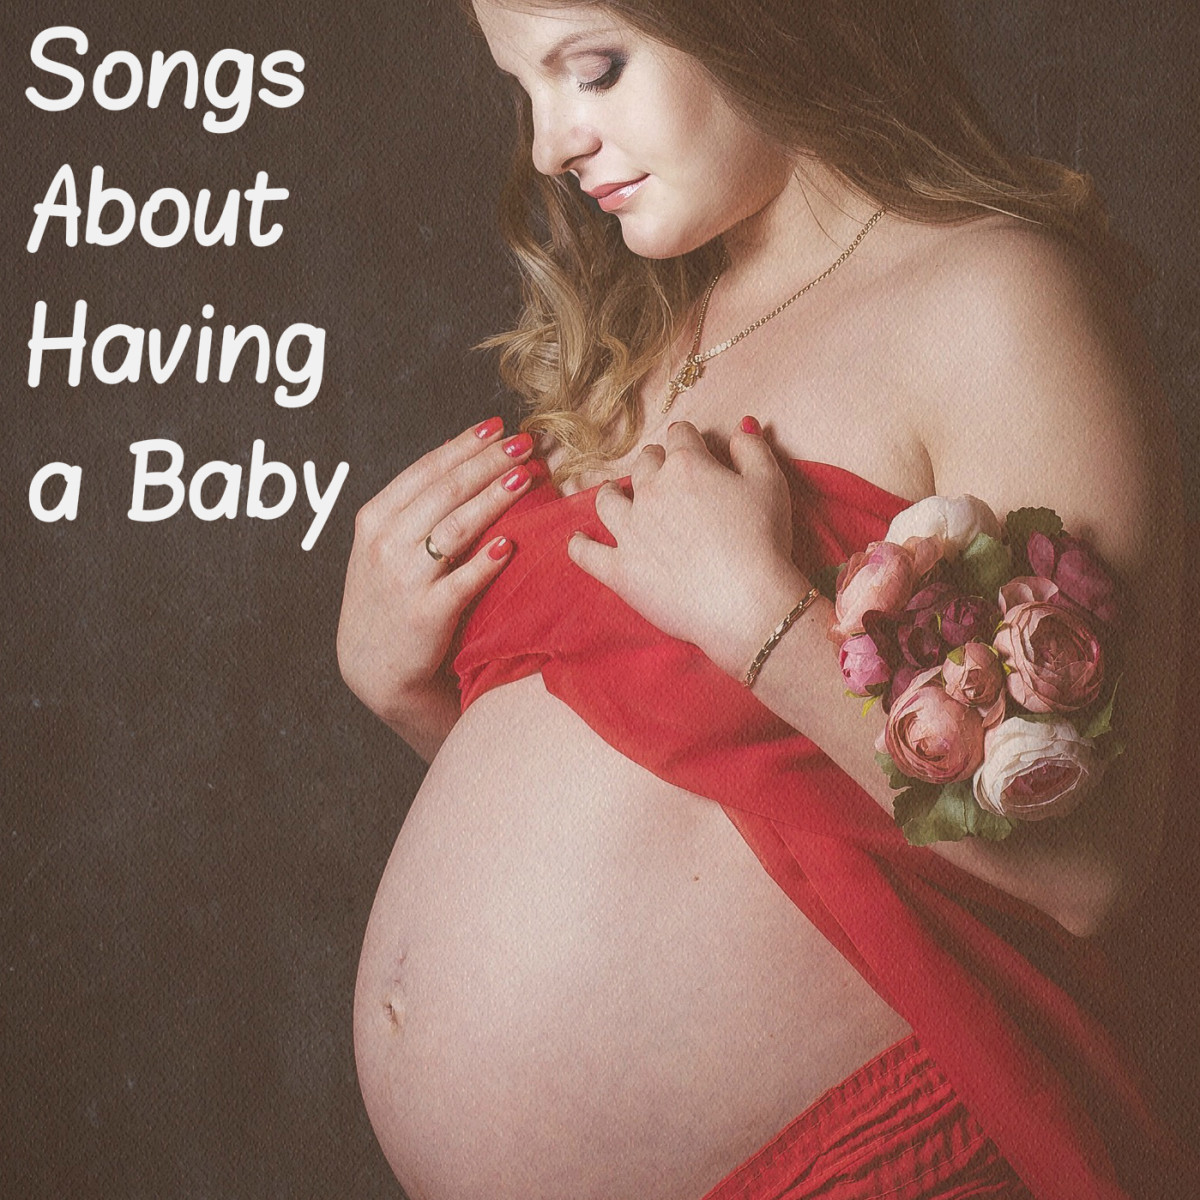 45 Songs About Having a Baby